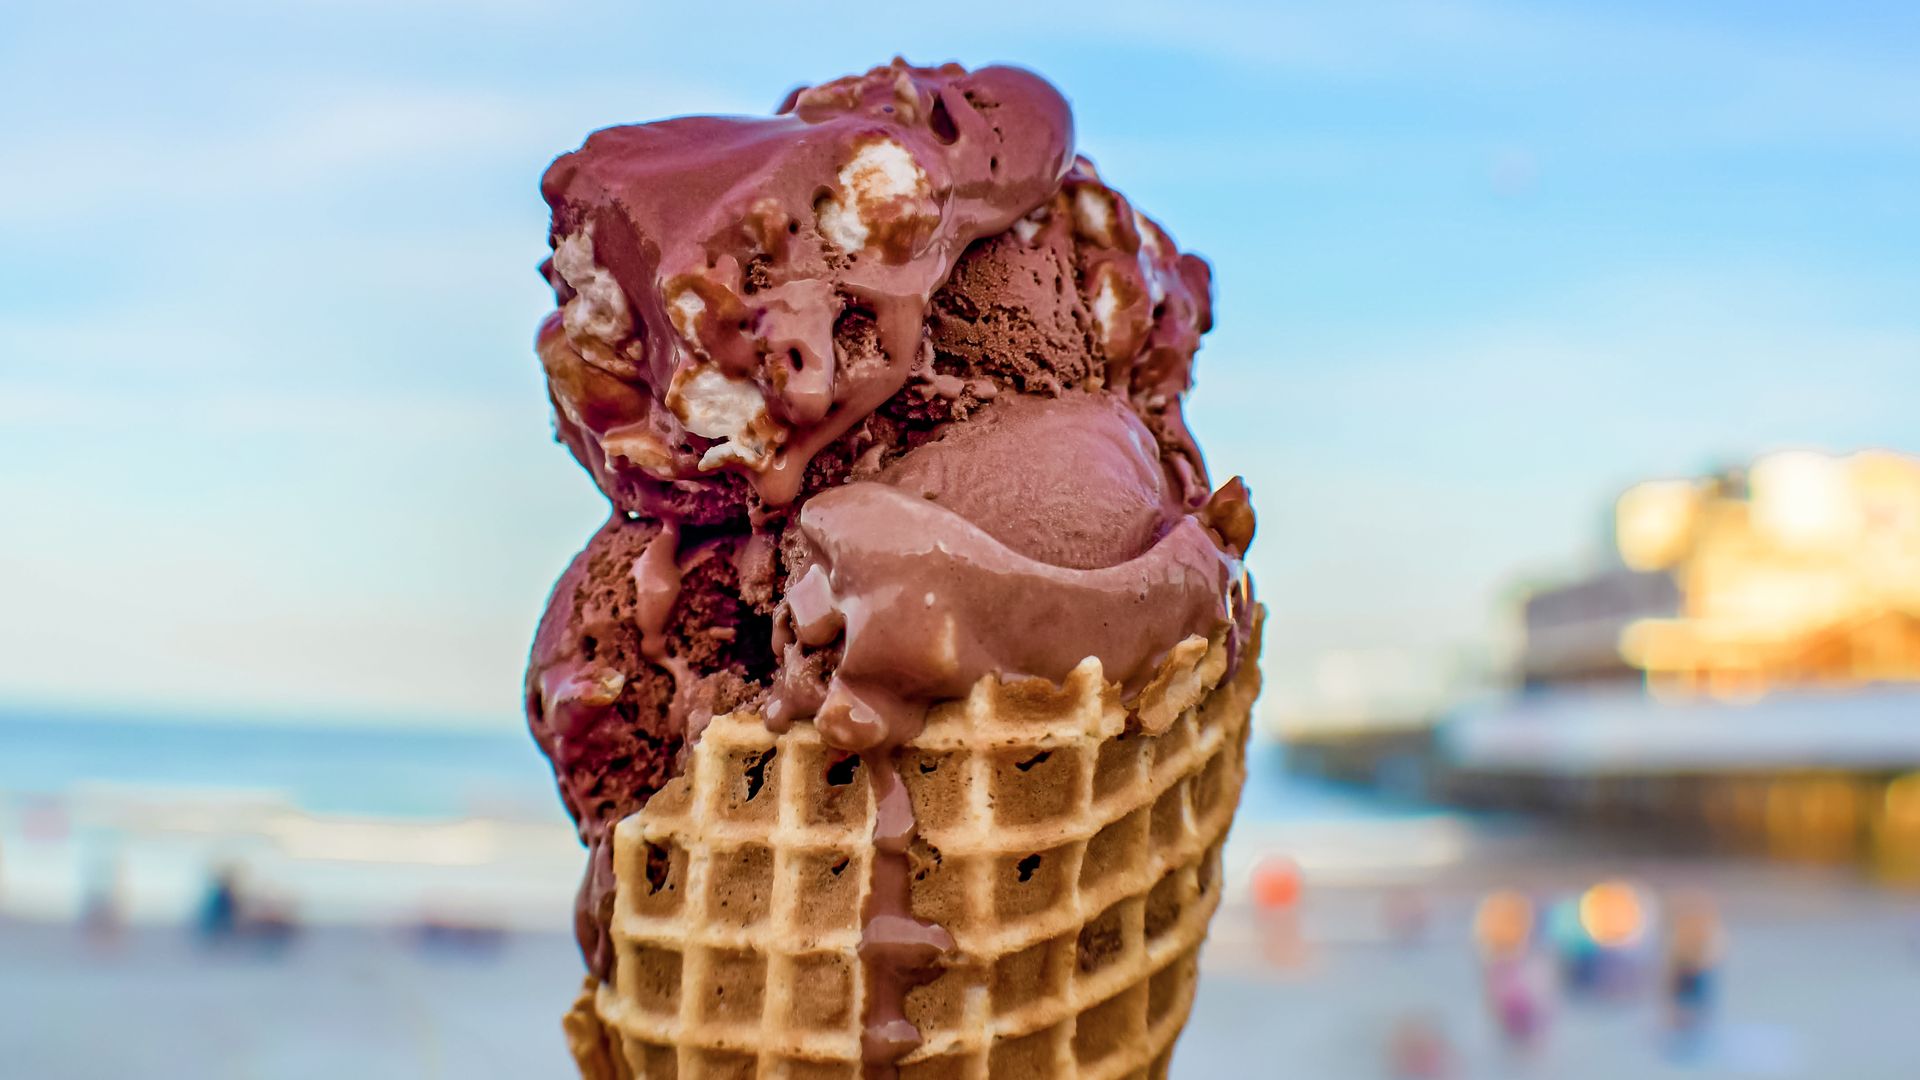 Photo of a Rocky Road ice cream scoop sitting in a waffle cone. It's held against the backdrop of a beach.